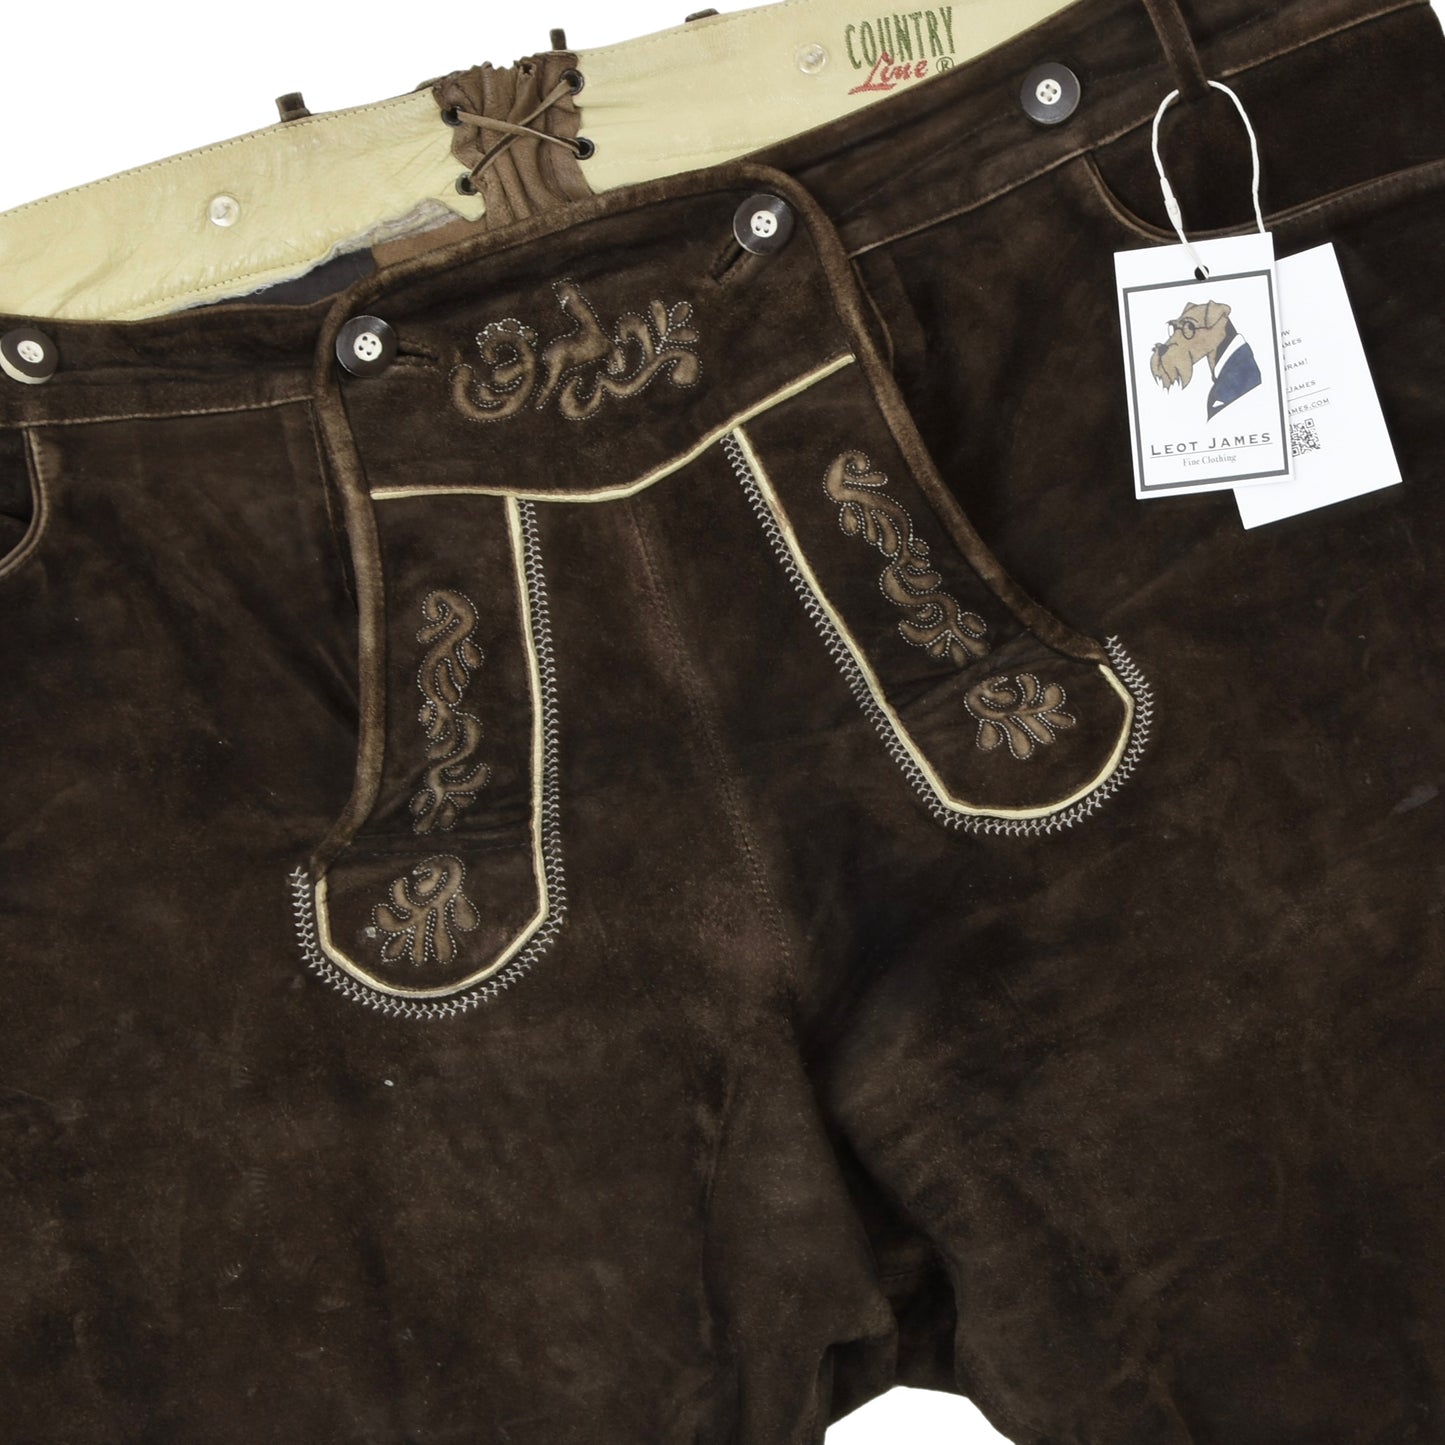 Country Line Goat Suede Lederhose Size 62 - Brown